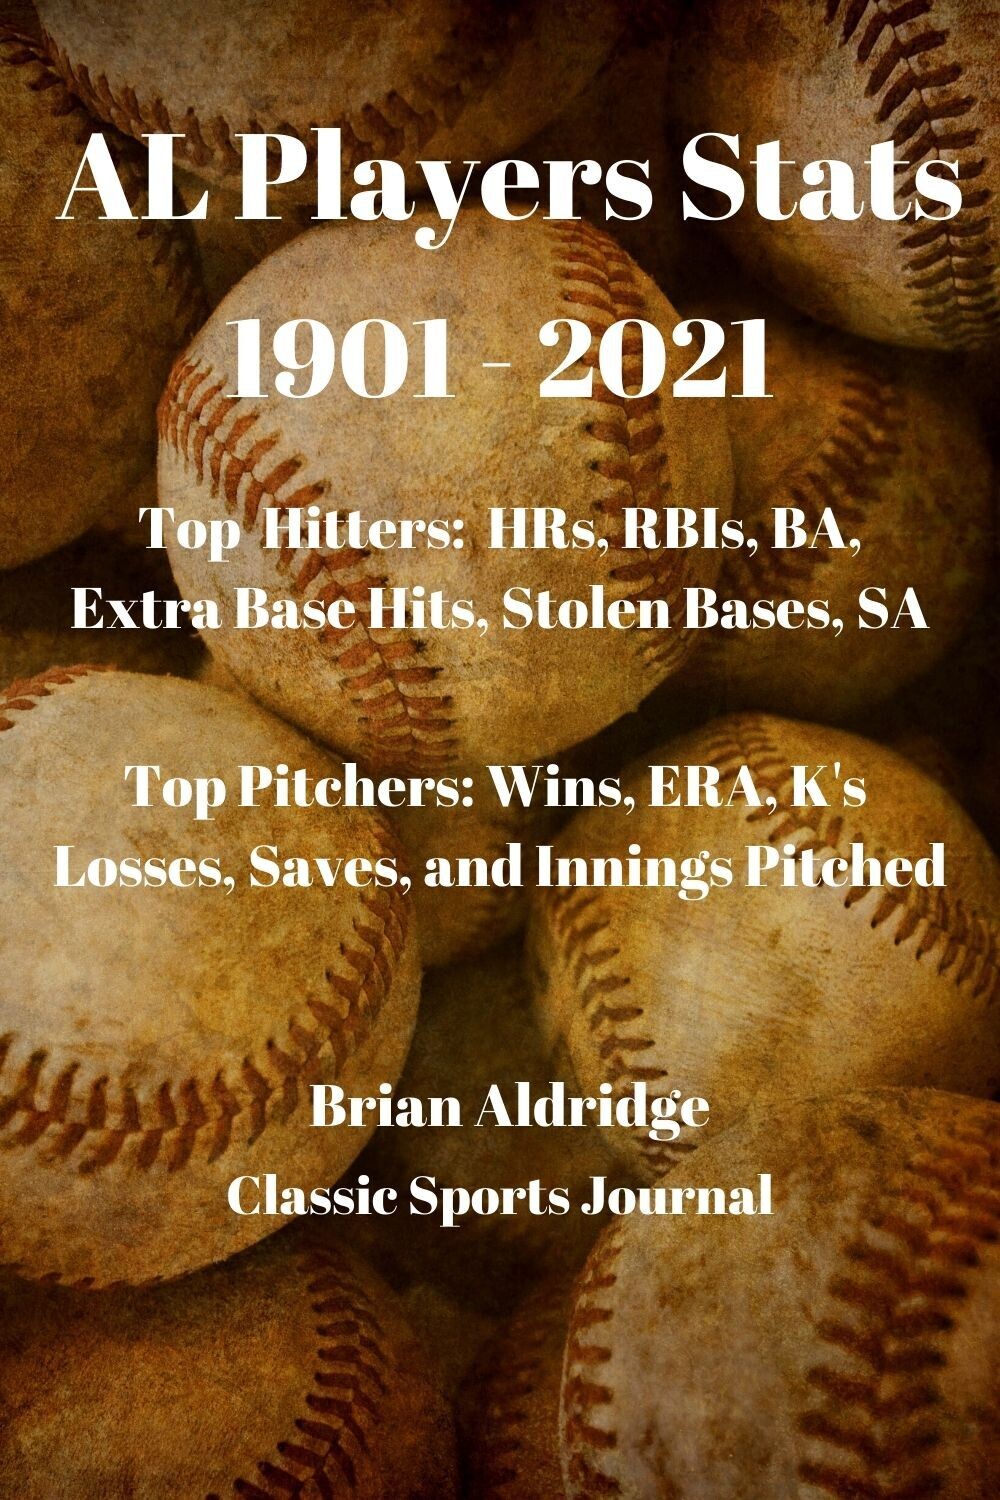 American League Players Stats 1901-2021